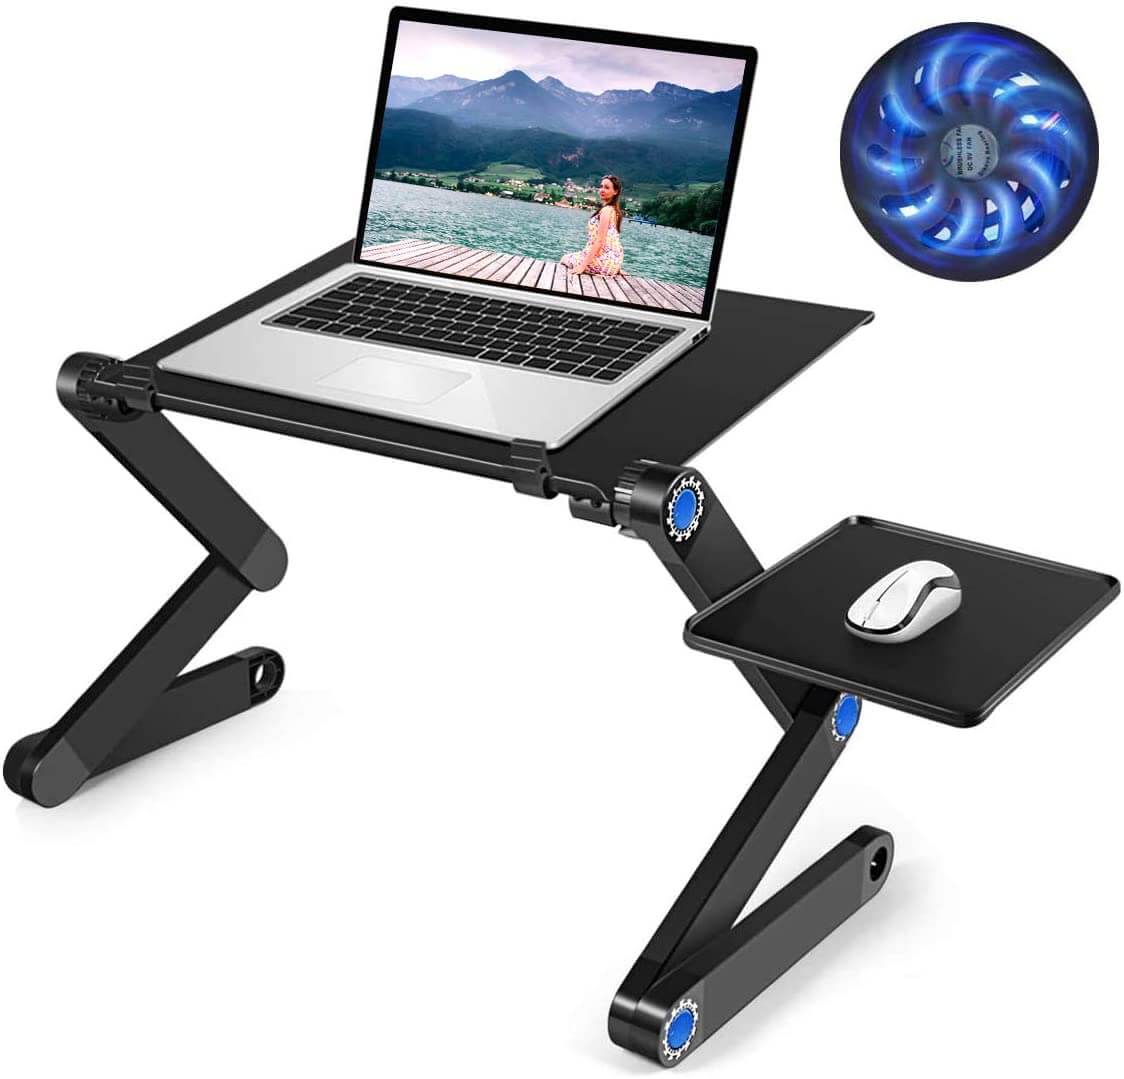 Laptop Table for Back pain